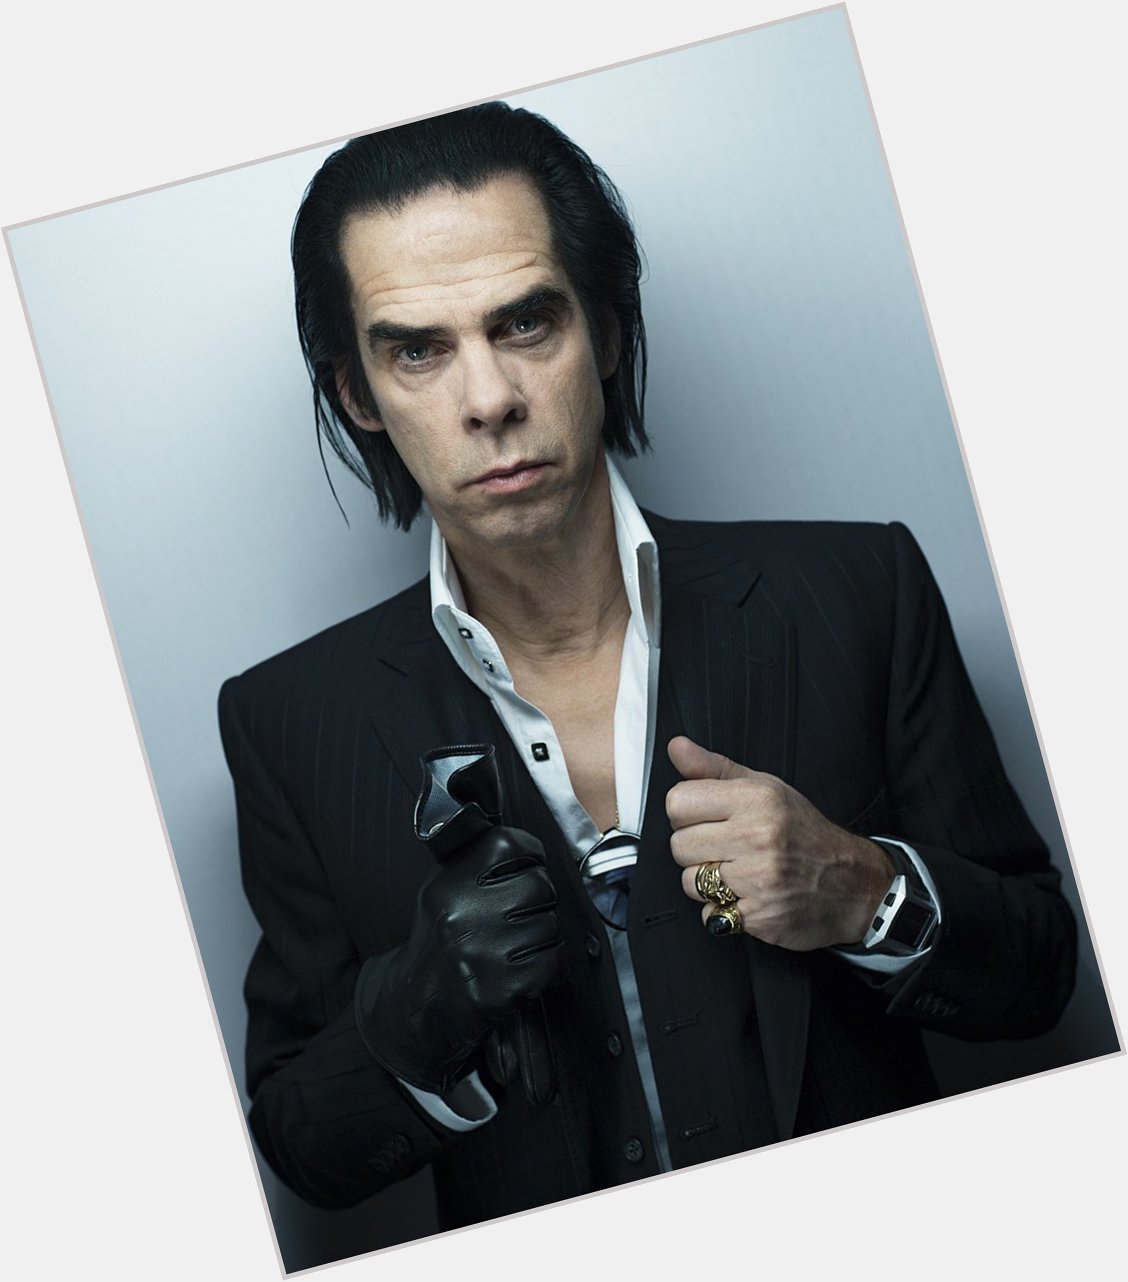 Nick Cave turns 60 today. Happy birthday to one of the biggest icons in rock history! 